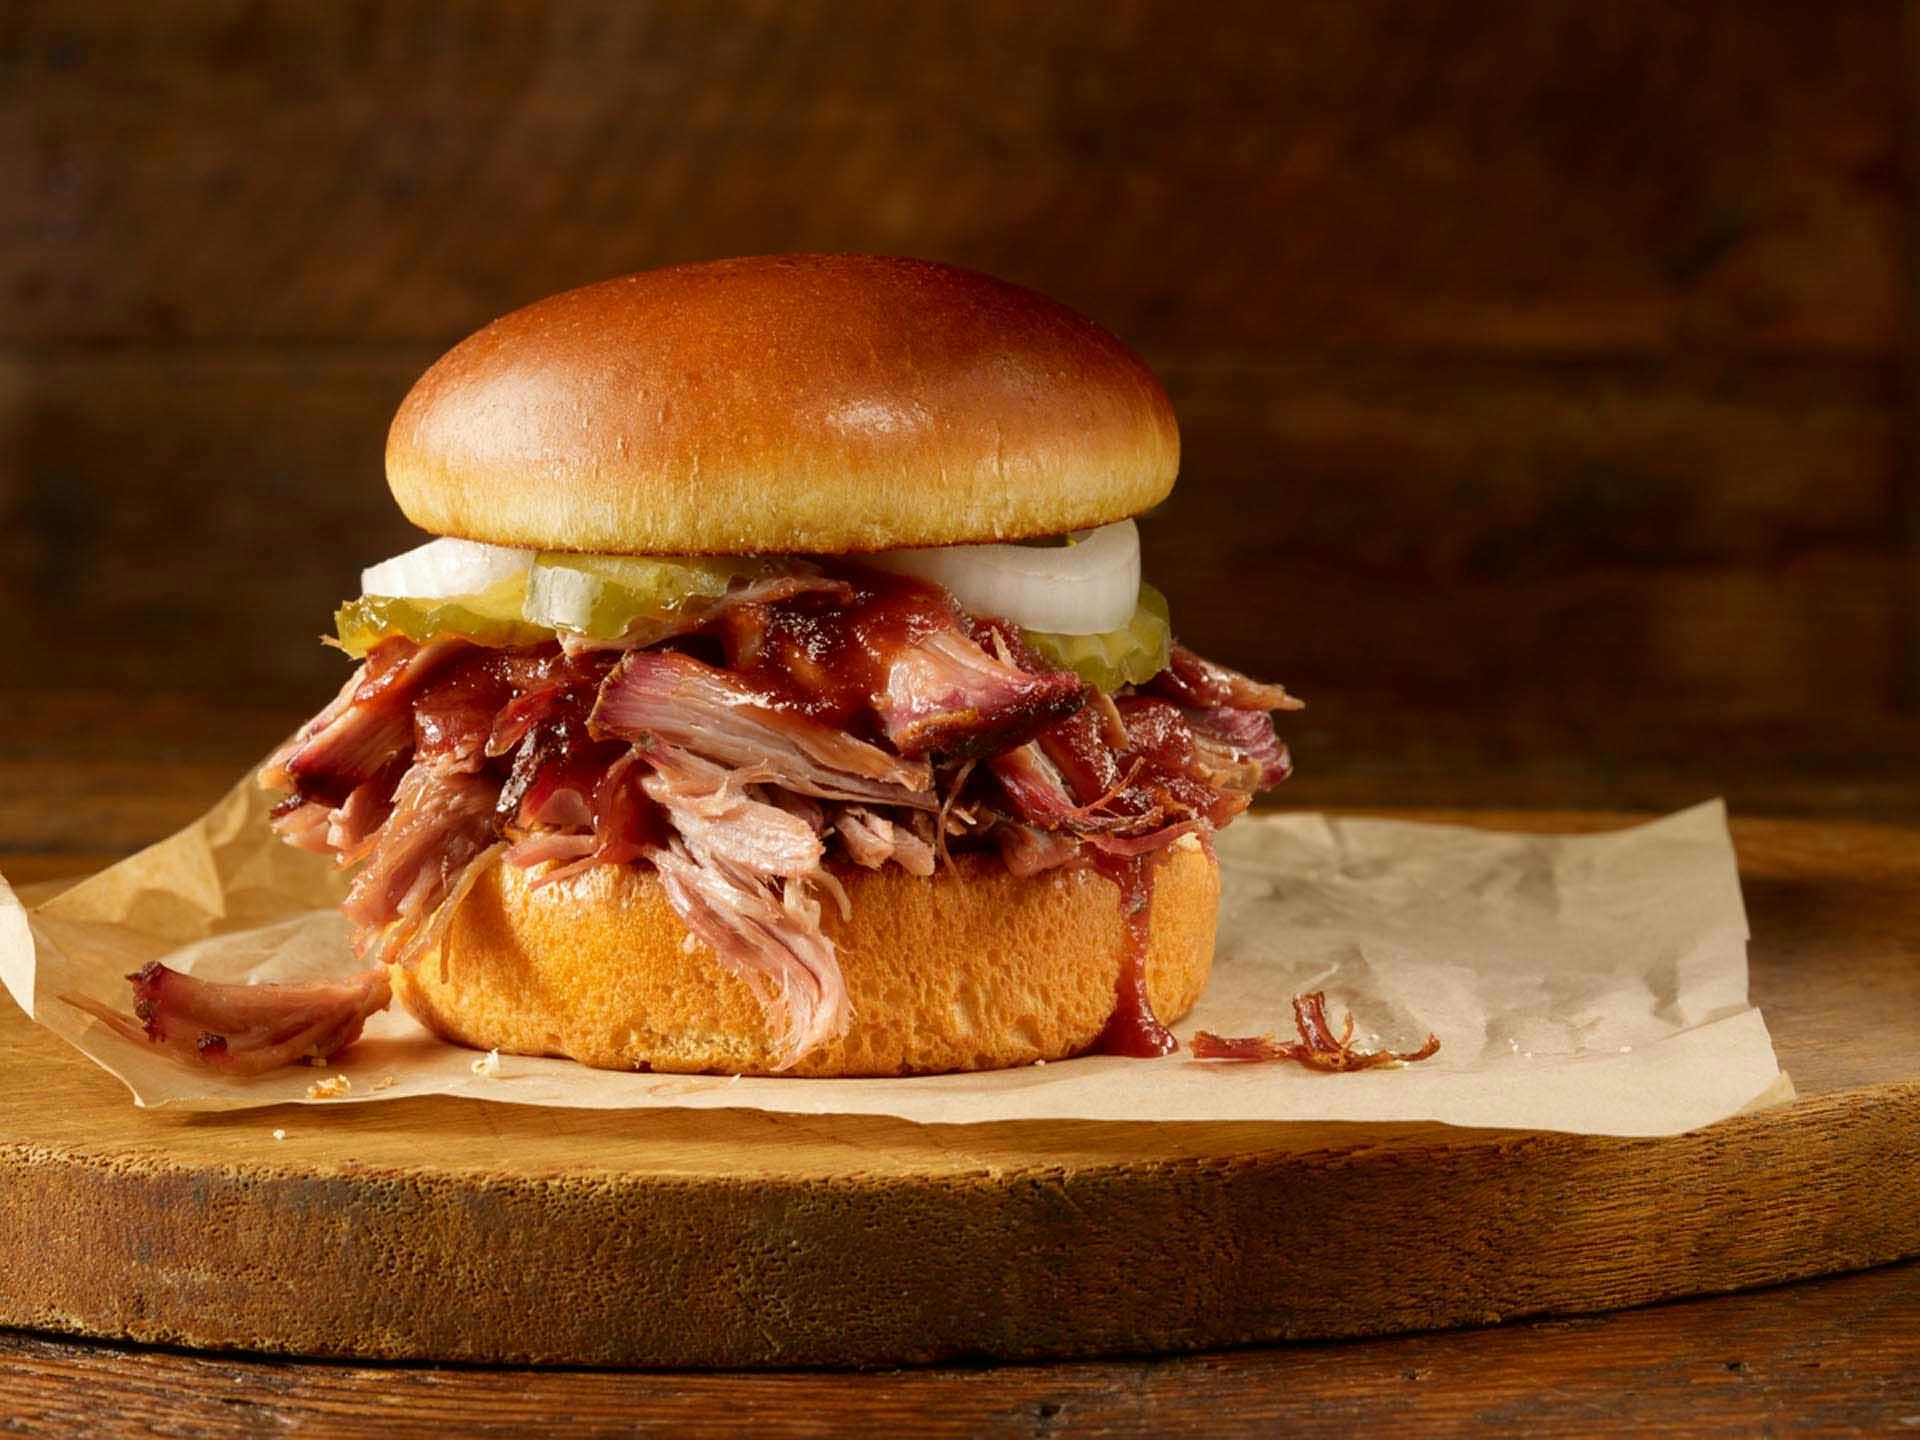 Celebrate National Pulled Pork Day at Dickey’s